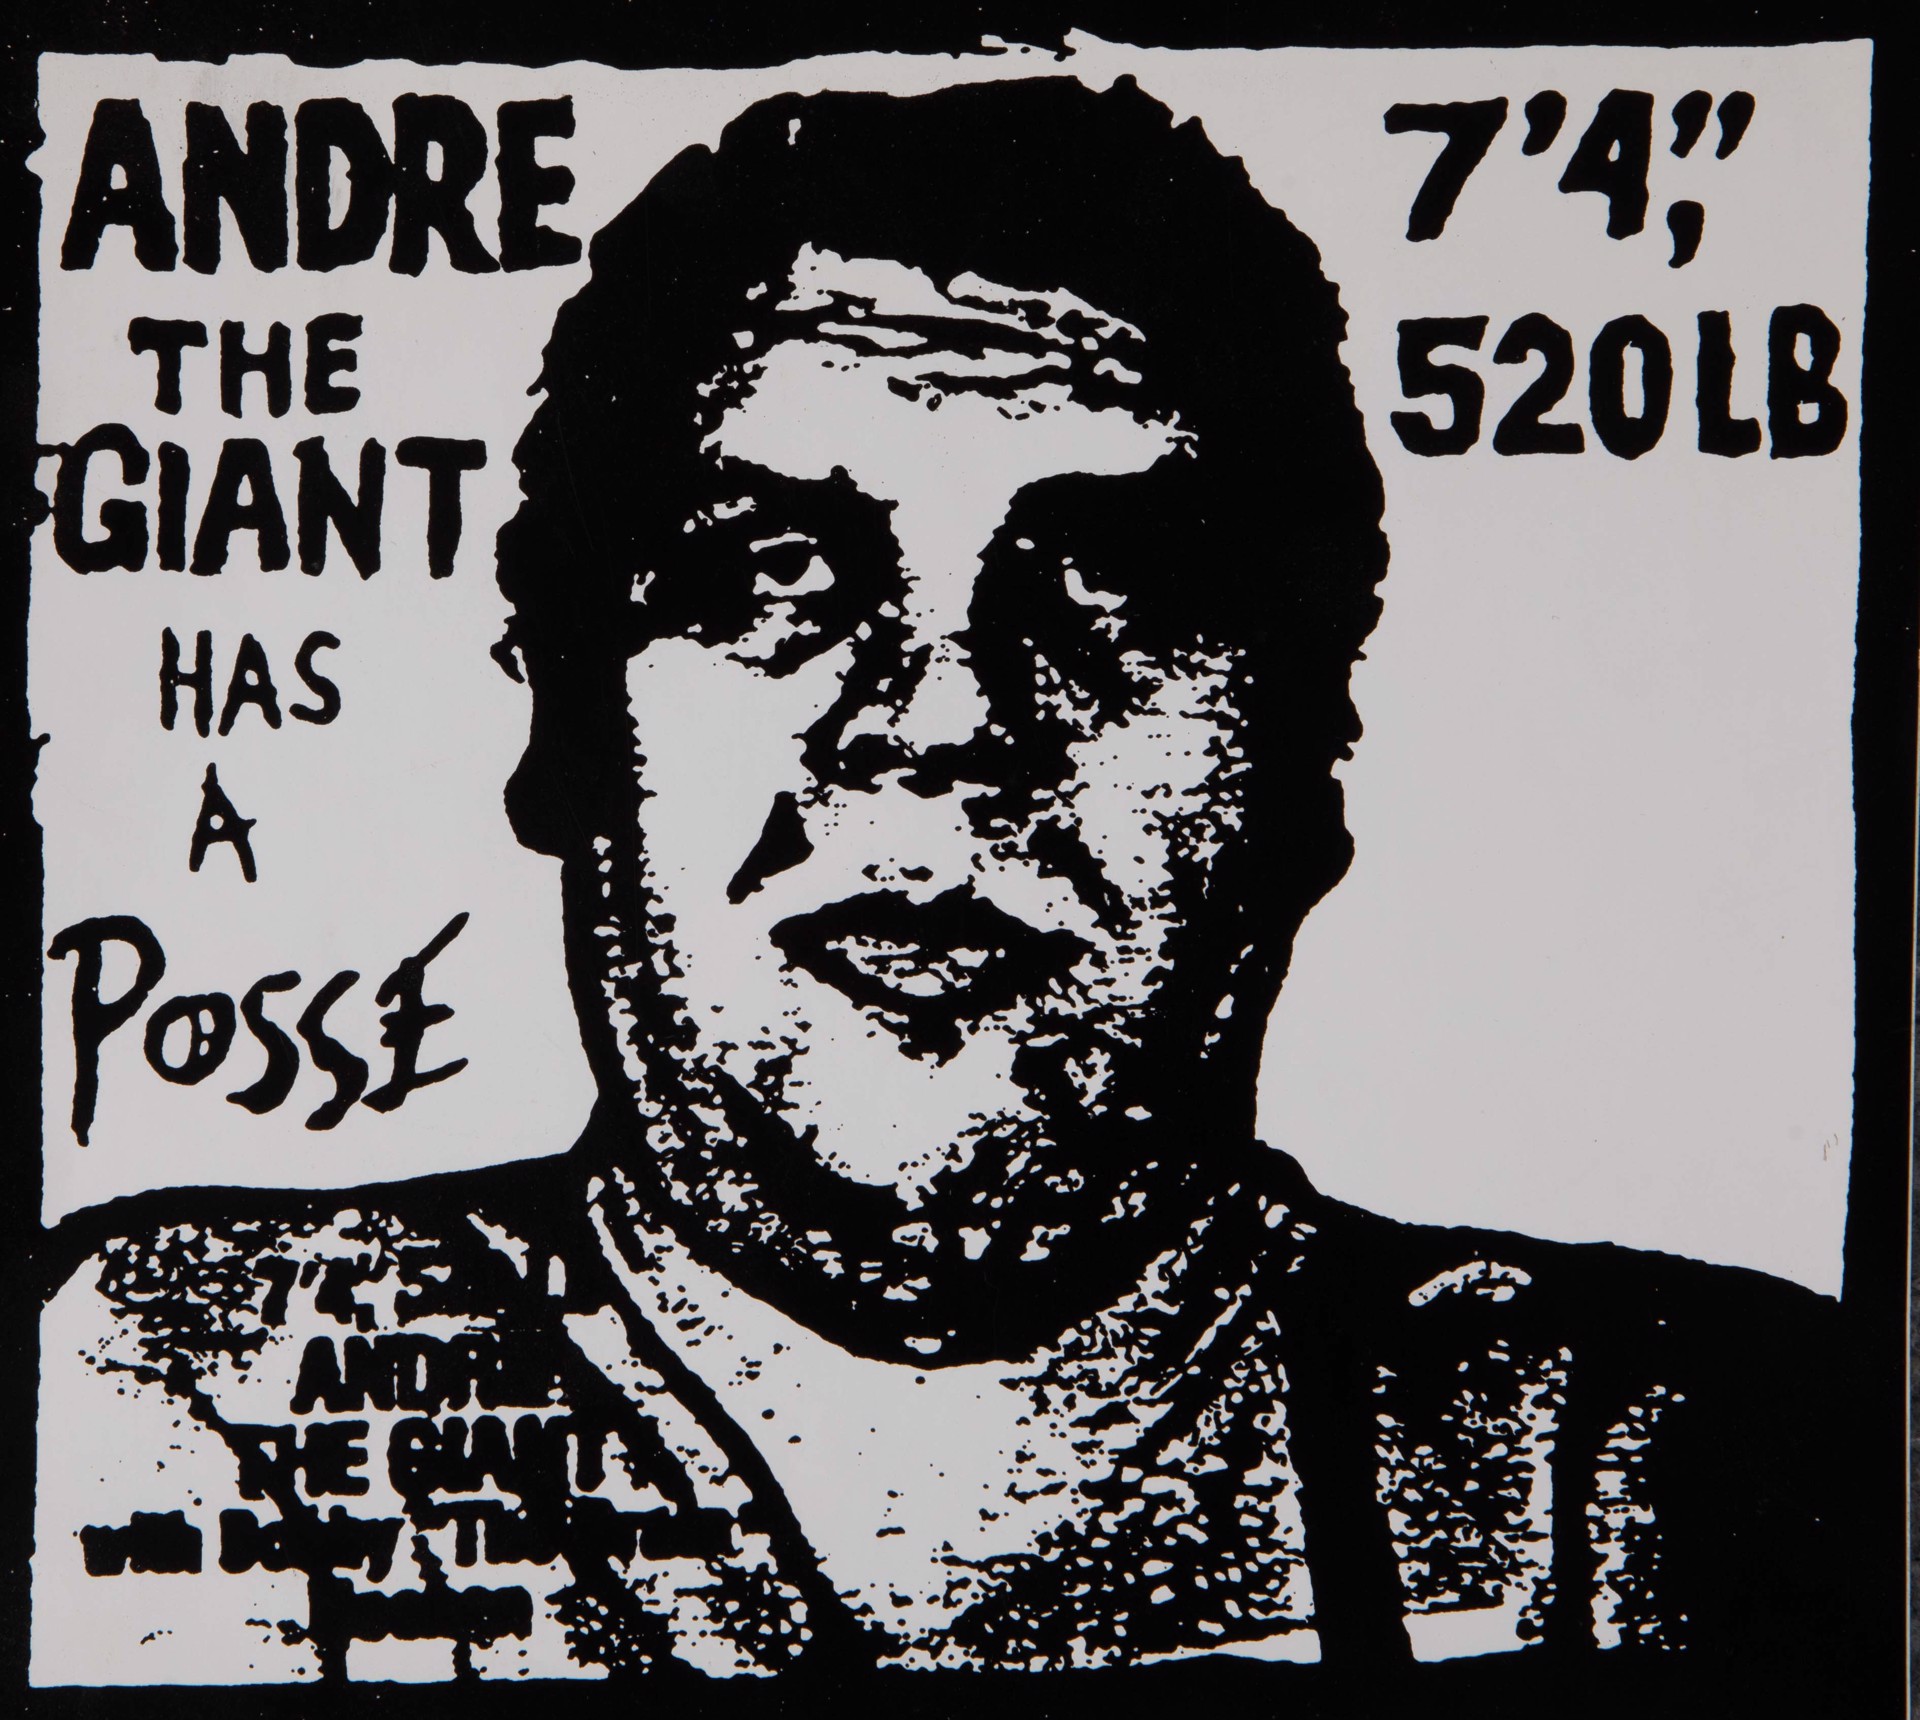 Andre The Giant W/ Posse by Shepard Fairey